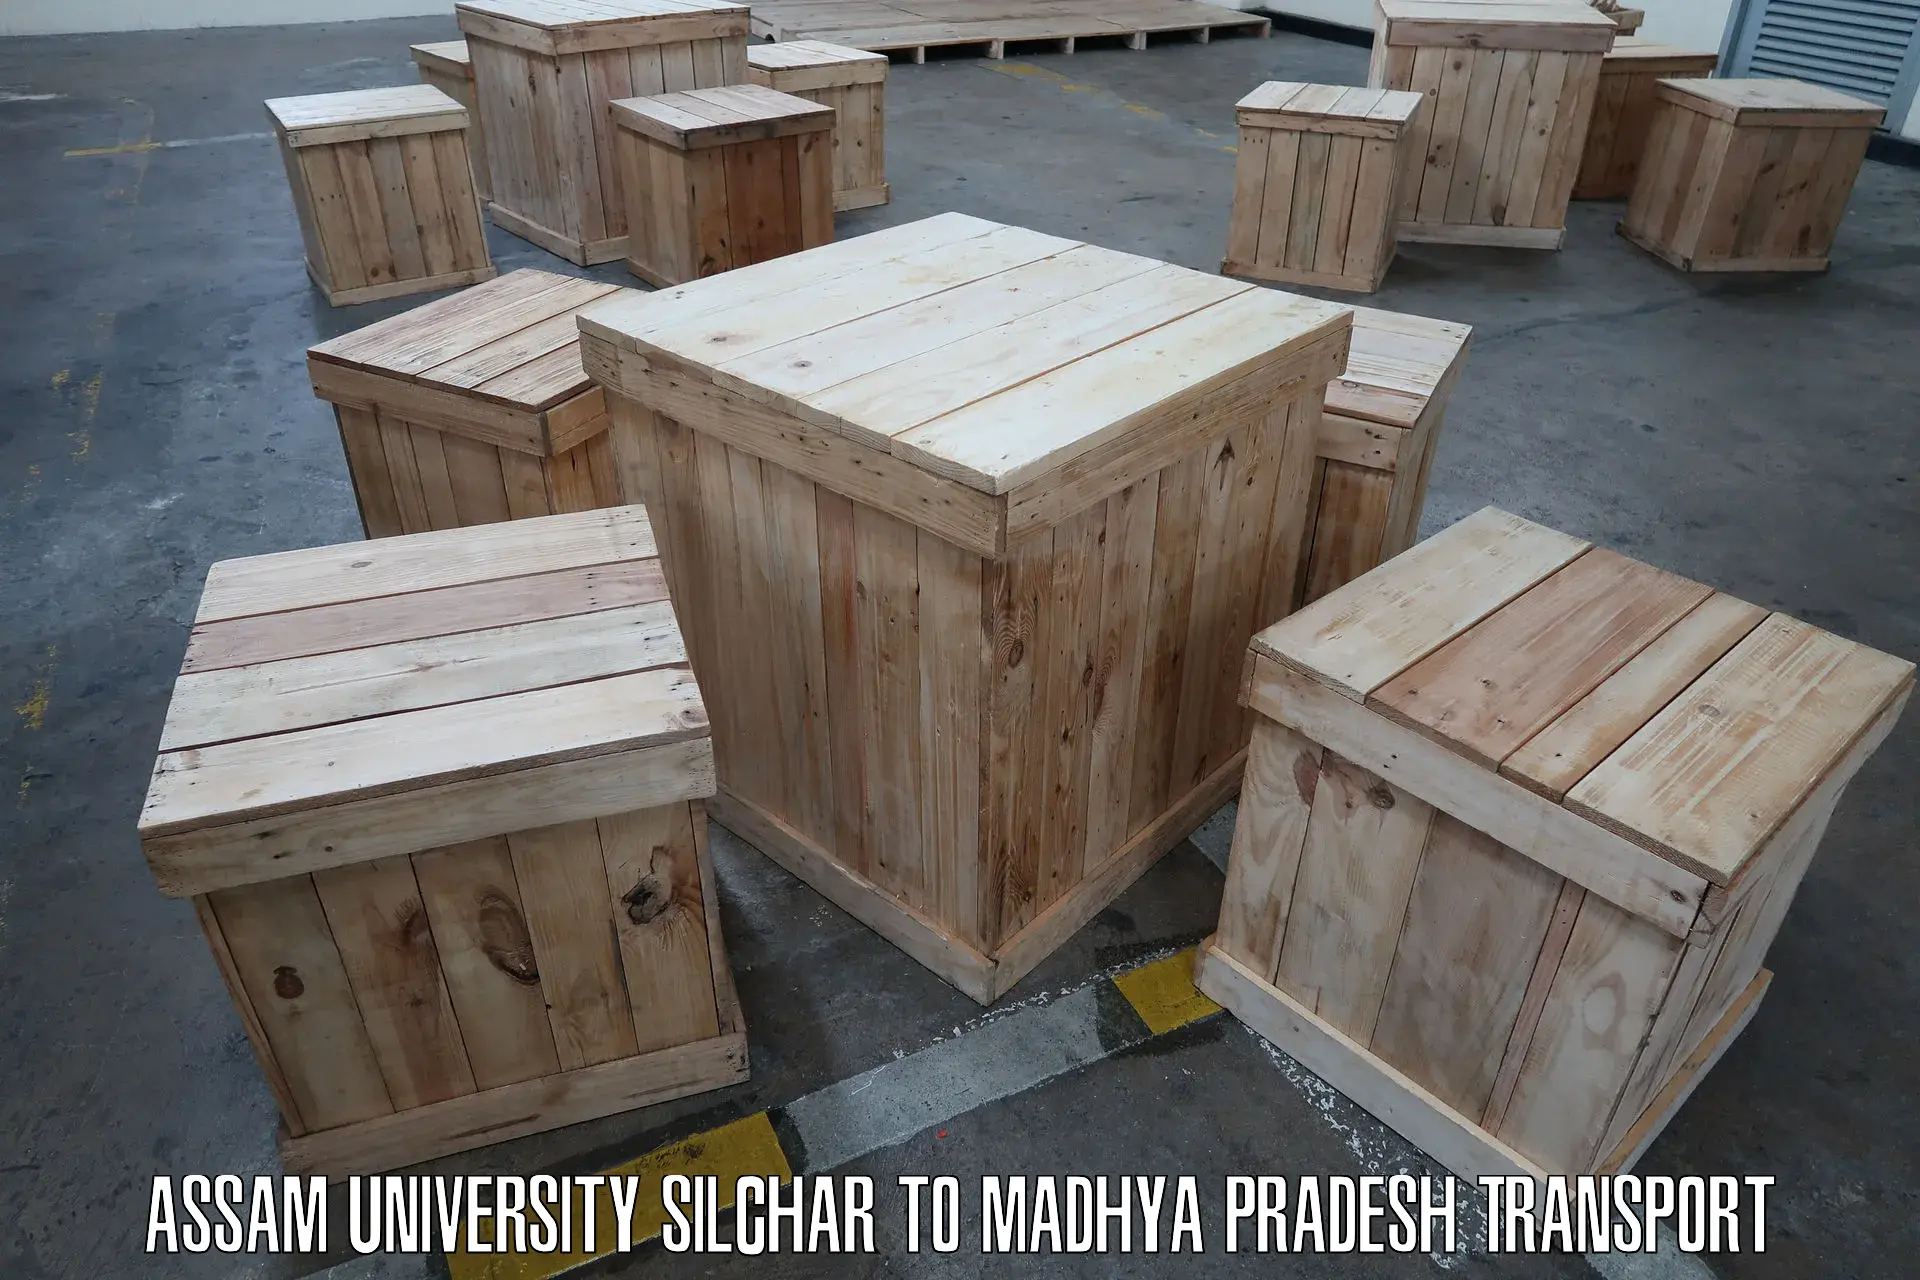 Truck transport companies in India Assam University Silchar to Bhind